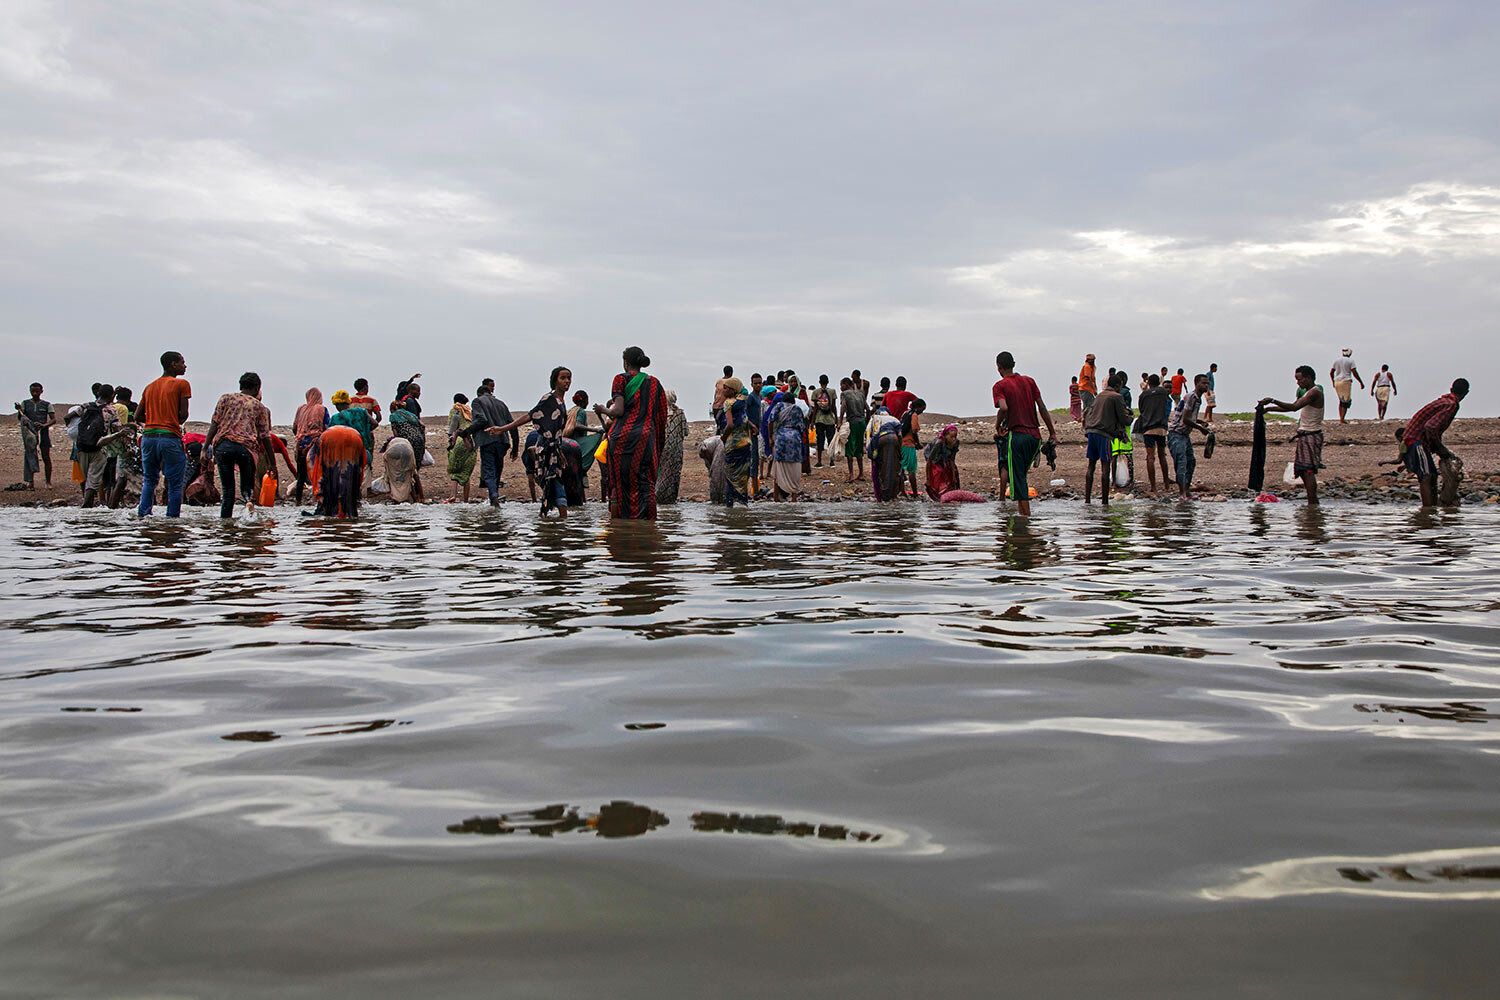 In this July 26, 2019 photo, Ethiopian migrants walk on the shores of Ras al-Ara, Lahj, Yemen, after disembarking from a boat. According to the U.N.'s International Organization for Migration the number of women making the trip jumped from nearly 15,000 in 2018 to more than 22,000 in 2019. The number of girls had an enormous increase, quadrupling from 2,075 to 8,360. Despite the many risks – smugglers' exploitation, hunger, drowning – they are undaunted. Image by Nariman El-Mofty / AP Photo. Yemen, 2019.